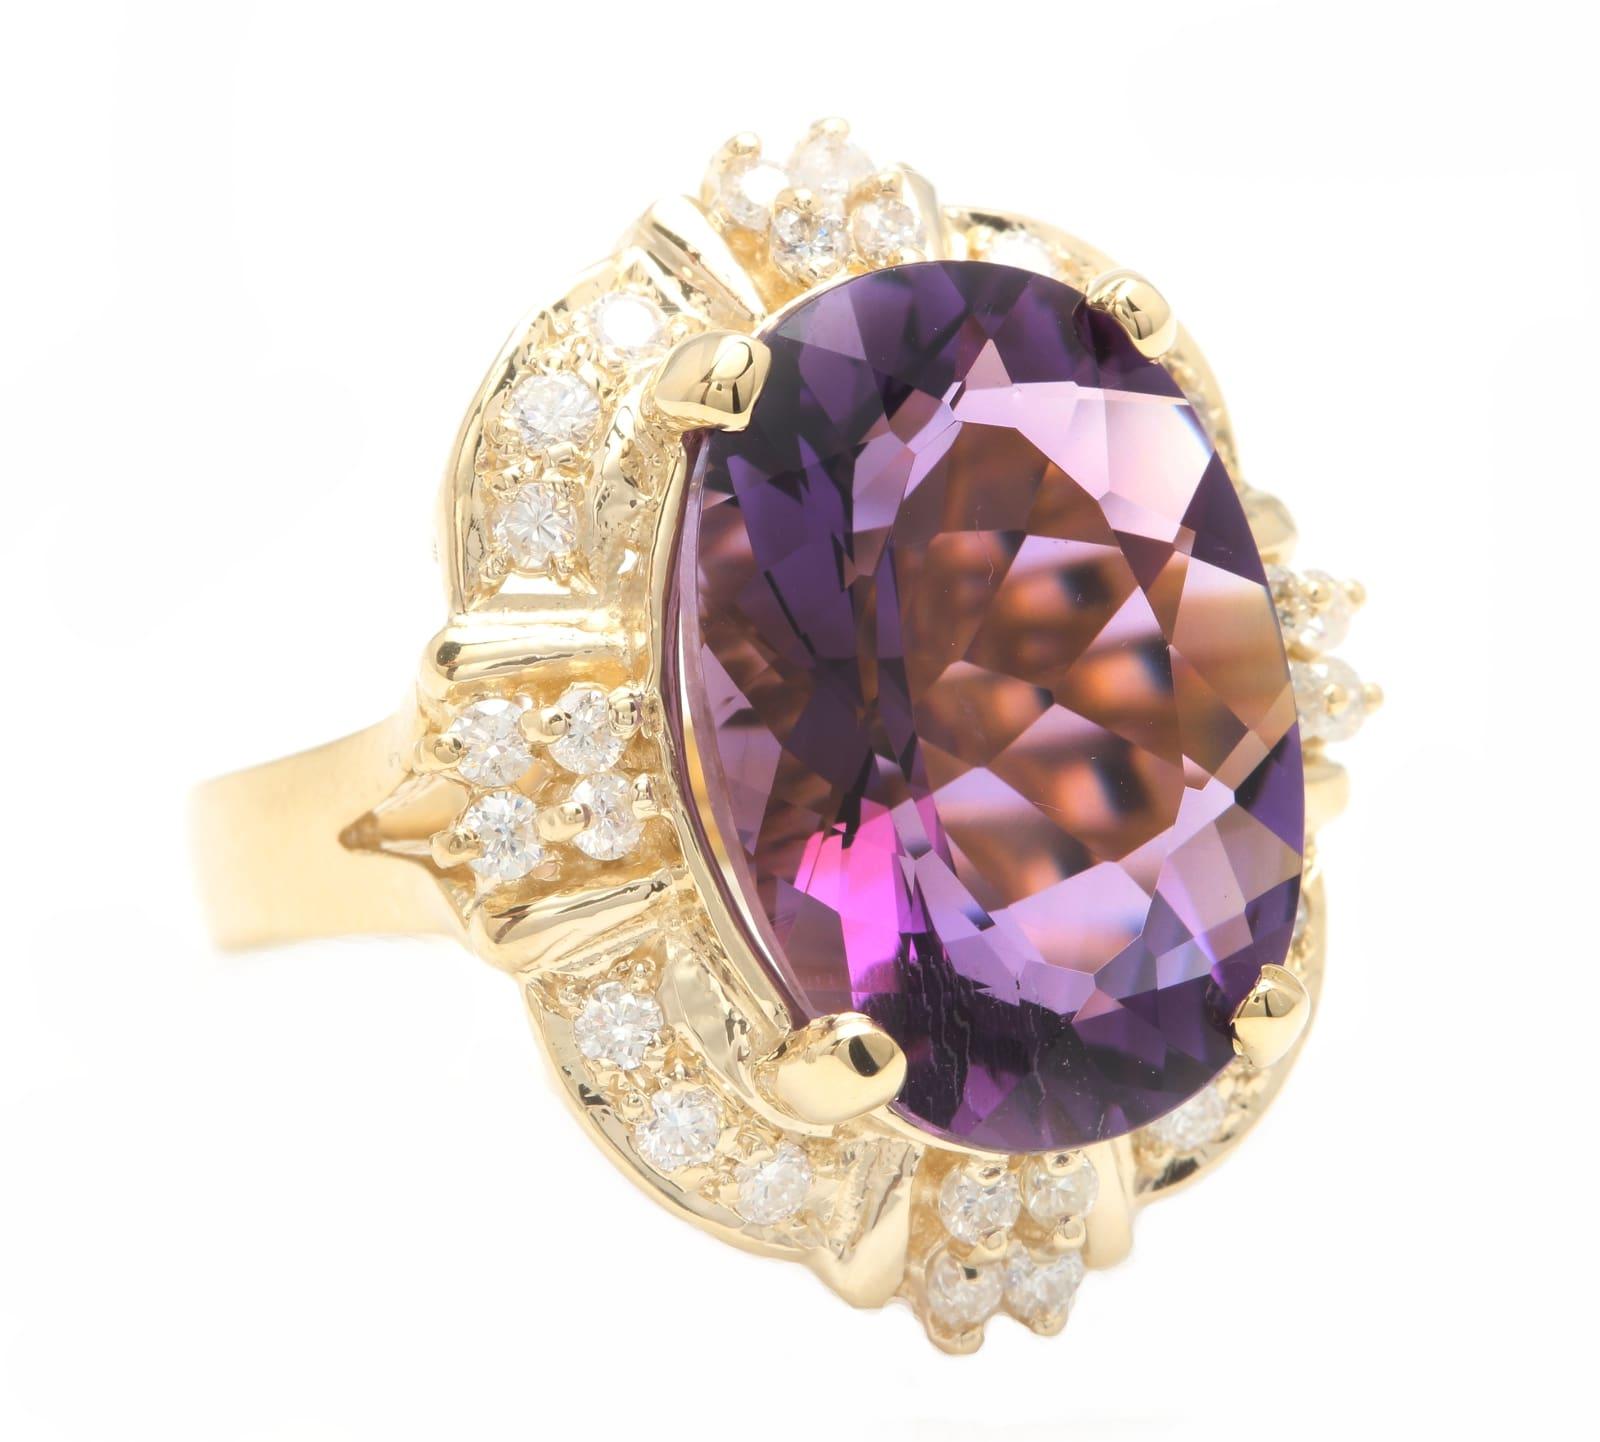 12.75 Carats Natural Amethyst and Diamond 14K Solid Yellow Gold Ring

Suggested Replacement Value: $6,500.00

Total Natural Oval Cut Amethyst Weights: Approx. 12.00 Carats 

Amethyst Measures: Approx. 18.00 x 13.00mm

Natural Round Diamonds Weight: